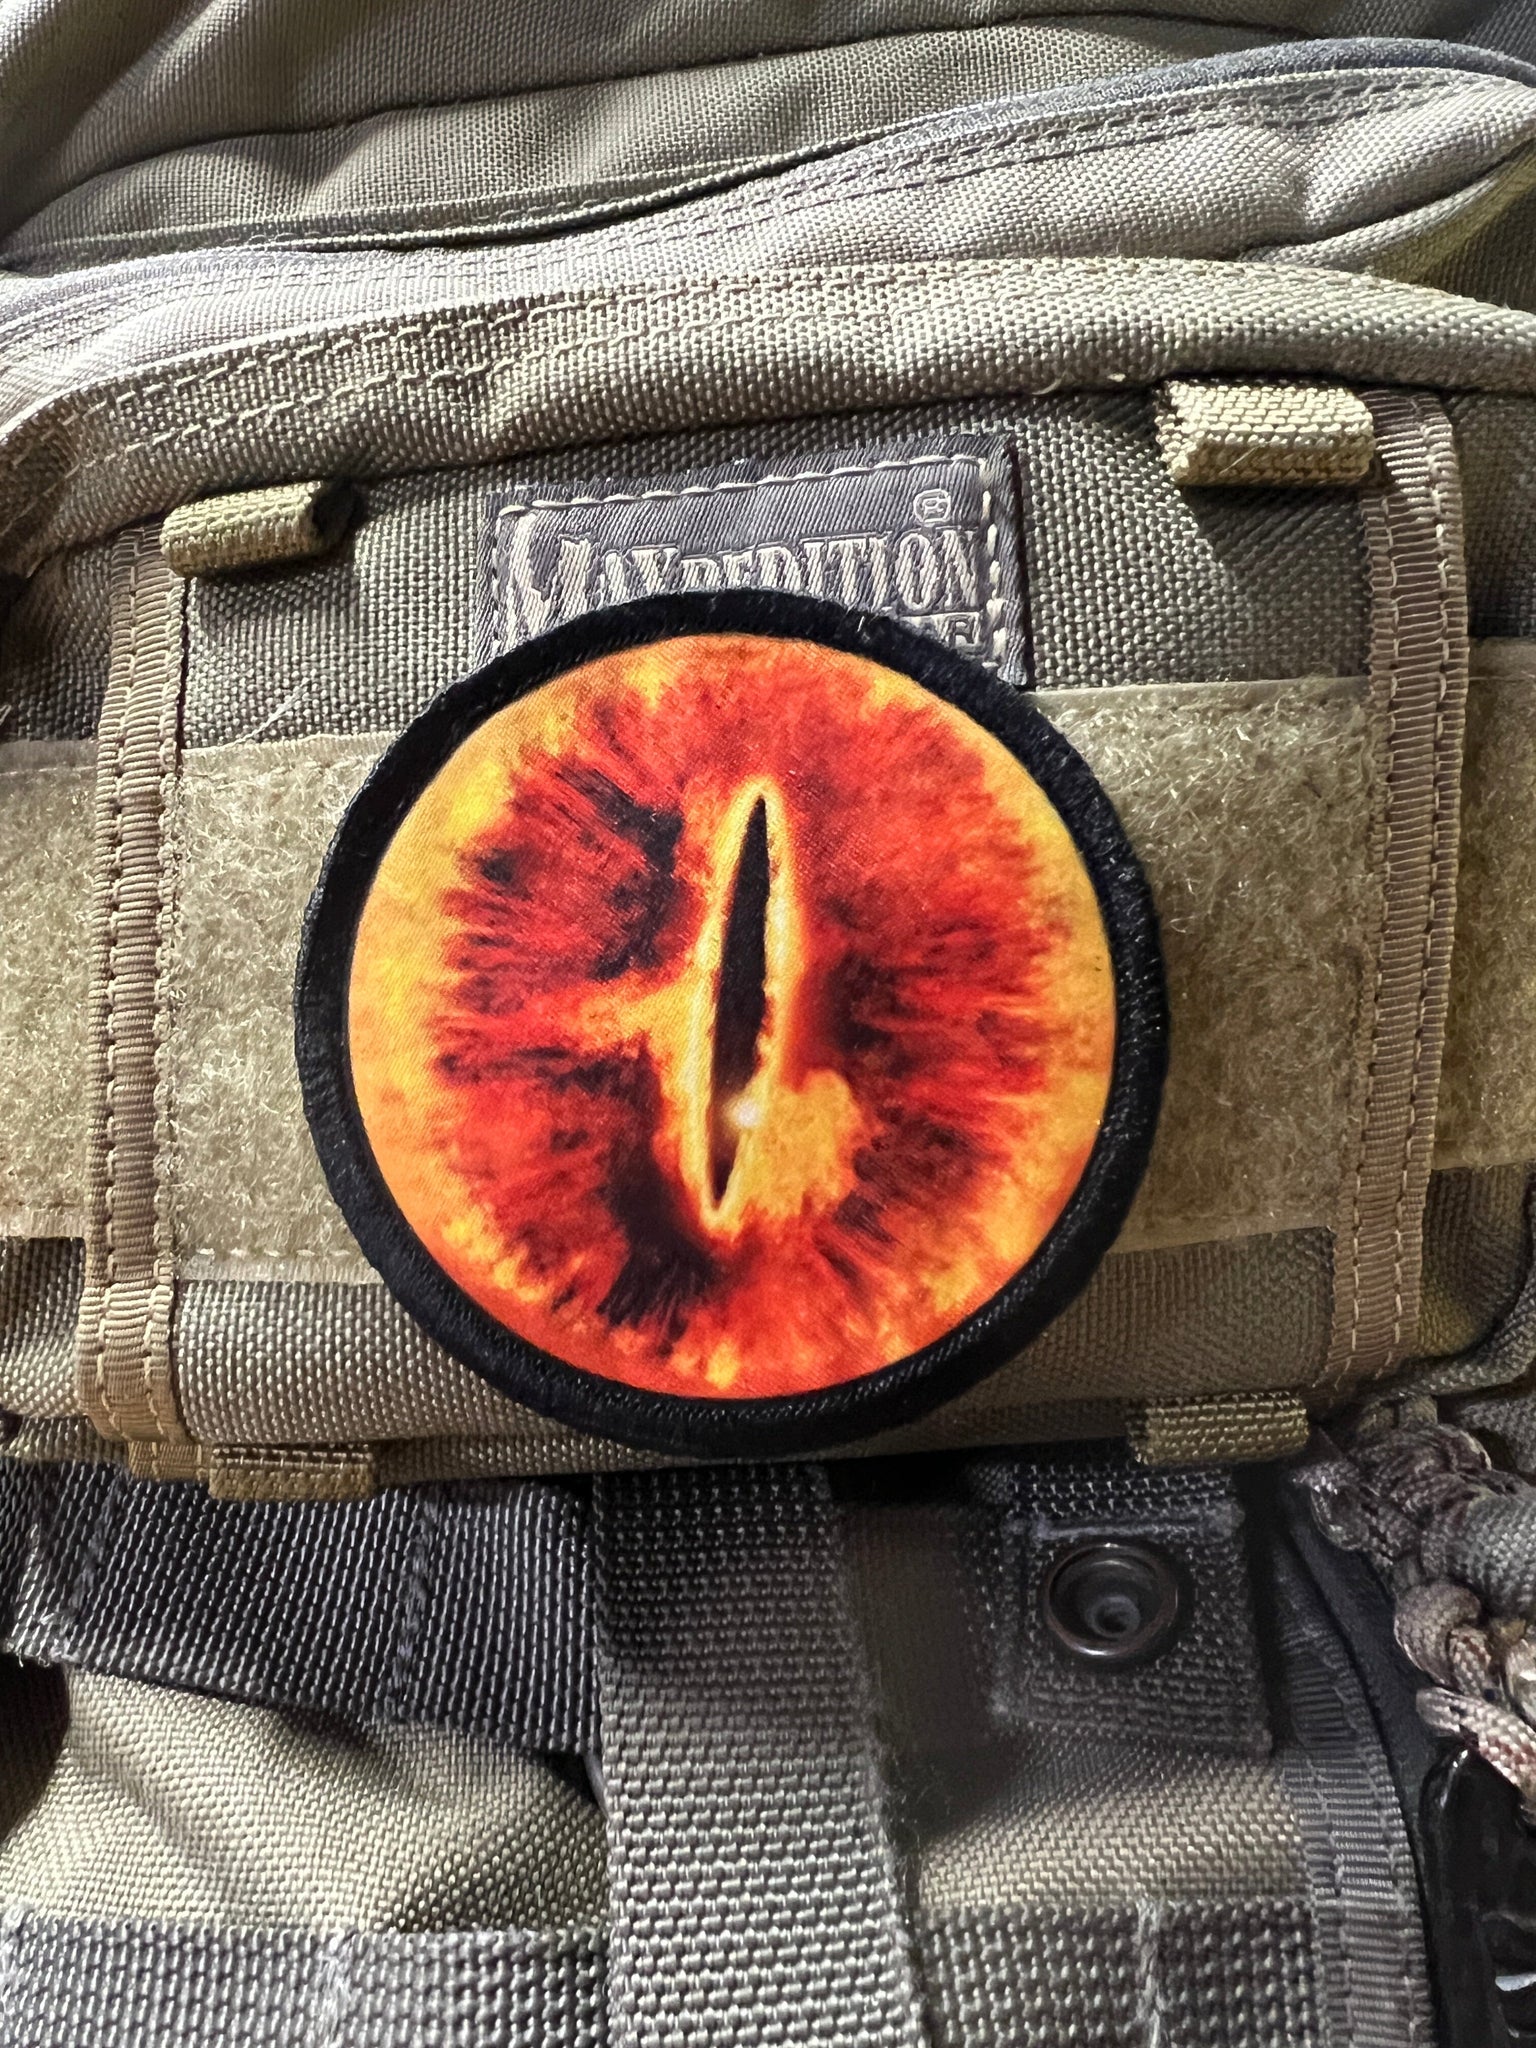 Lord of the rings eye of sauron velcro morale aptch